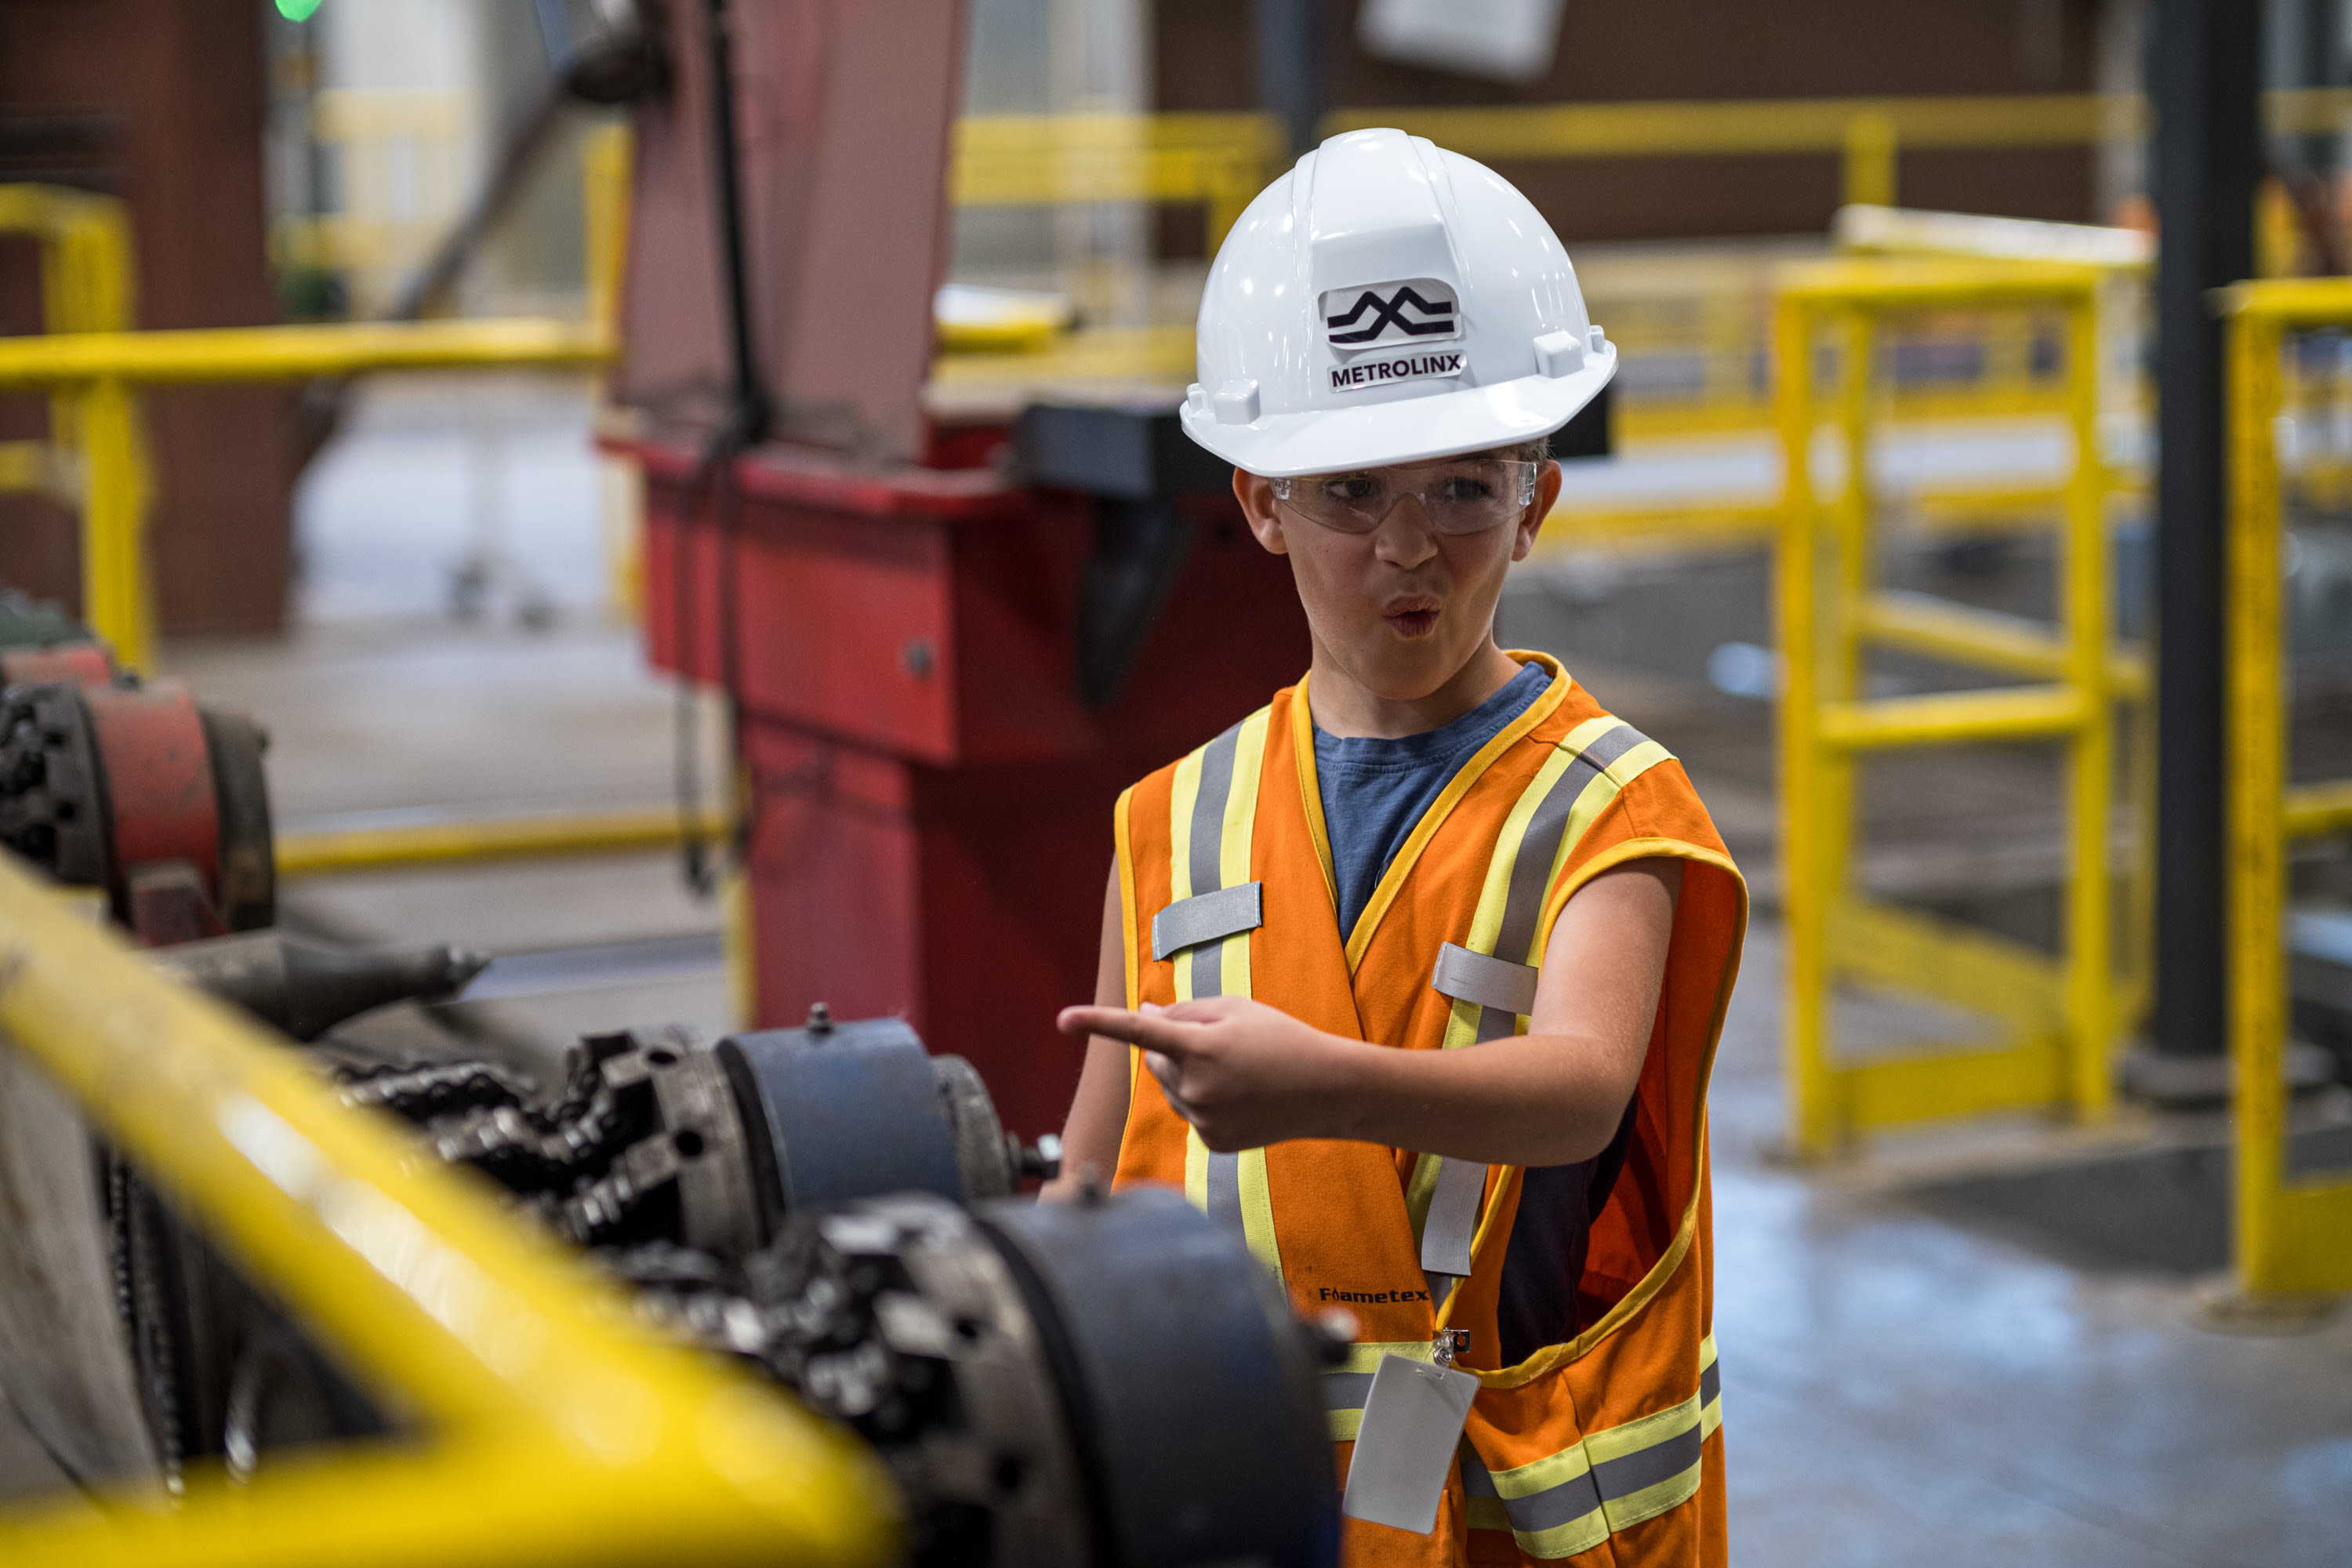 7-year-old Nicco Di Mauro gets a behind the scenes tour of Willowbrook Maintenance Facility